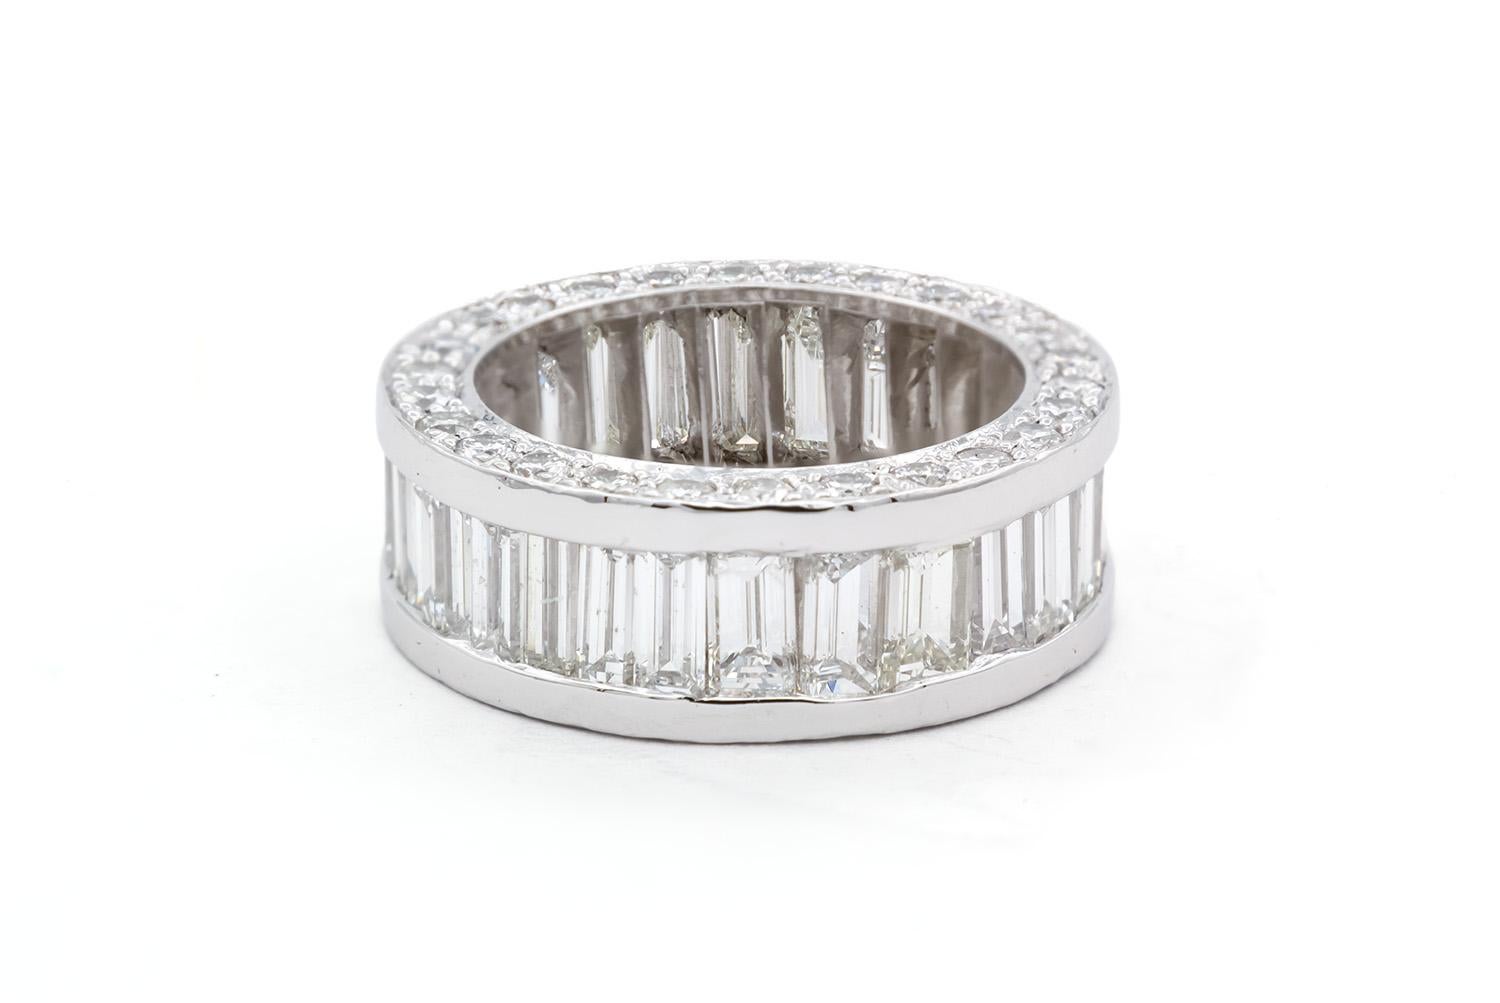 We are pleased to offer this Platinum Baguette & Round Brilliant Diamond Eternity Wedding Band. This beautiful band features an eternity style with an estimated 6.00ctw G-I/VS-SI baguette & round brilliant cut diamonds all set in a stunning platinum